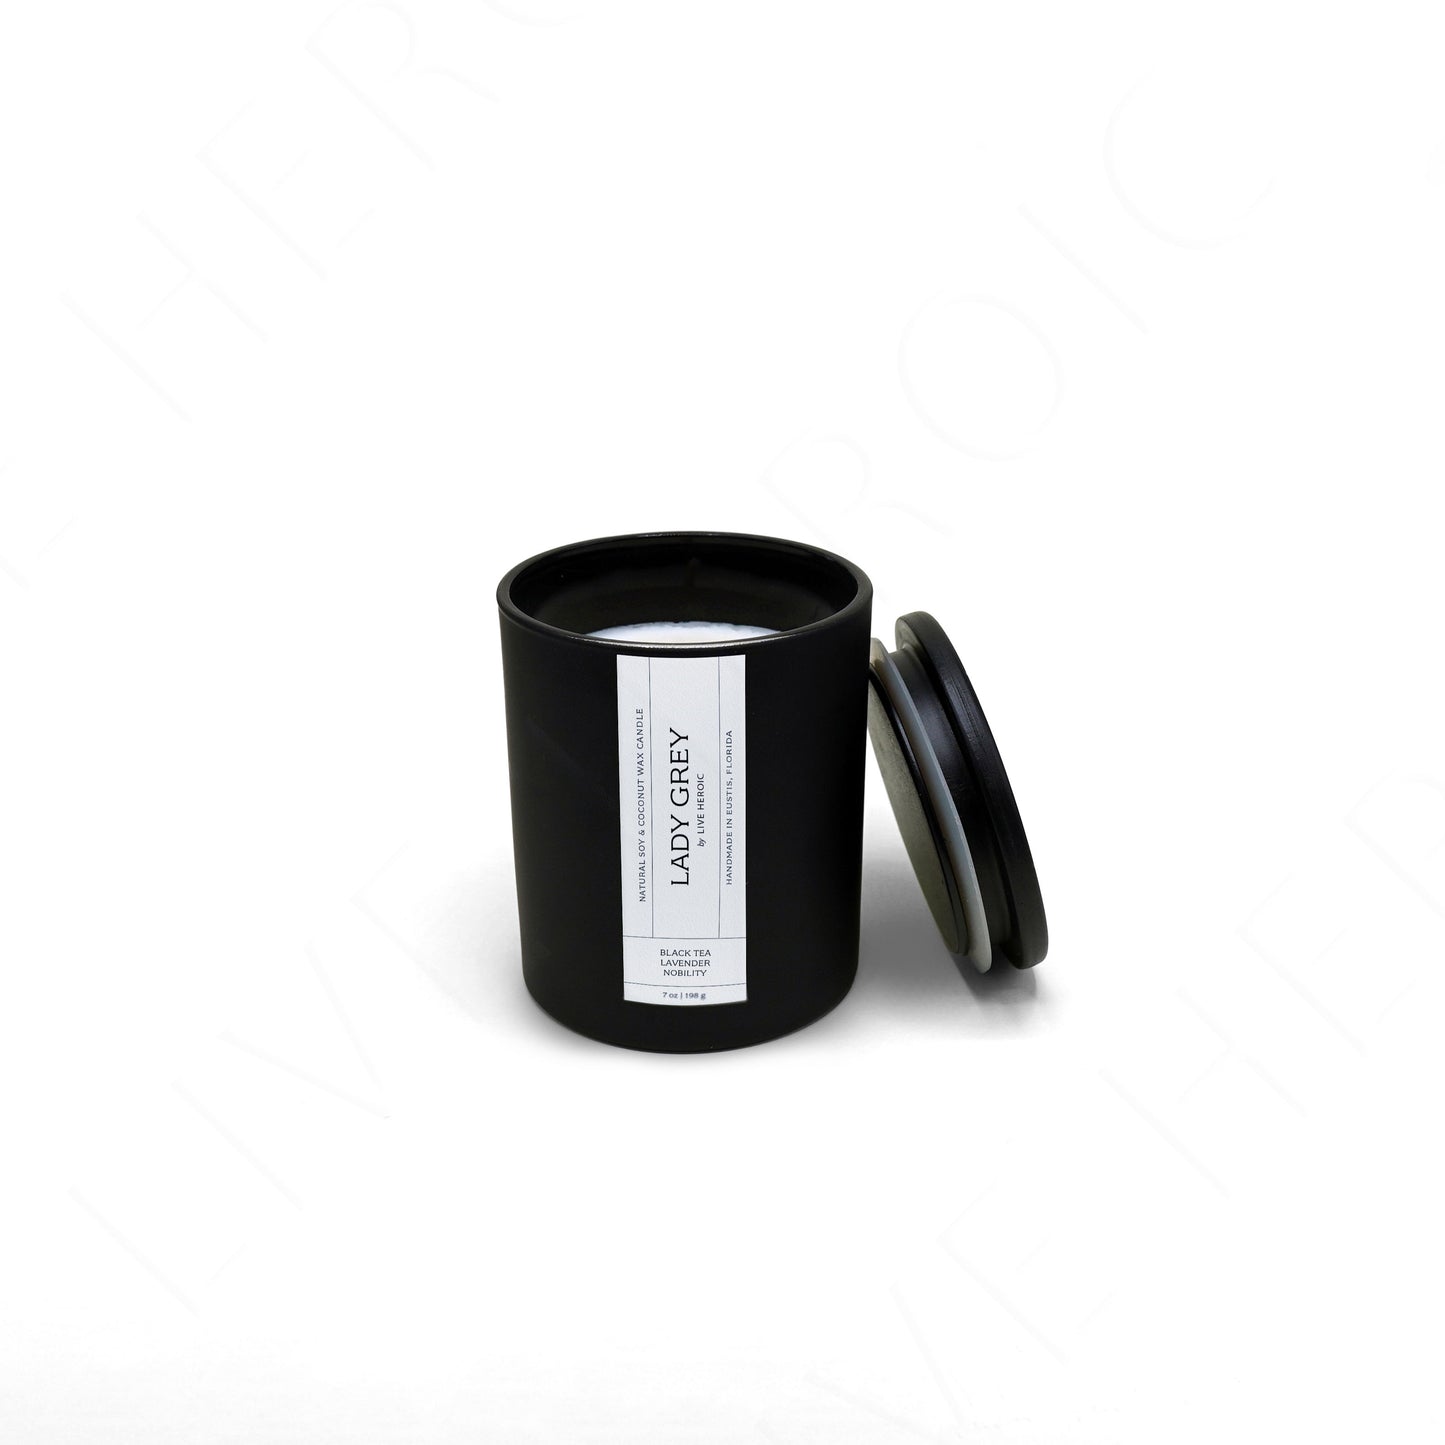 Lady Grey | 7 oz Scented Coconut & Soy Wax Candle by Live Heroic